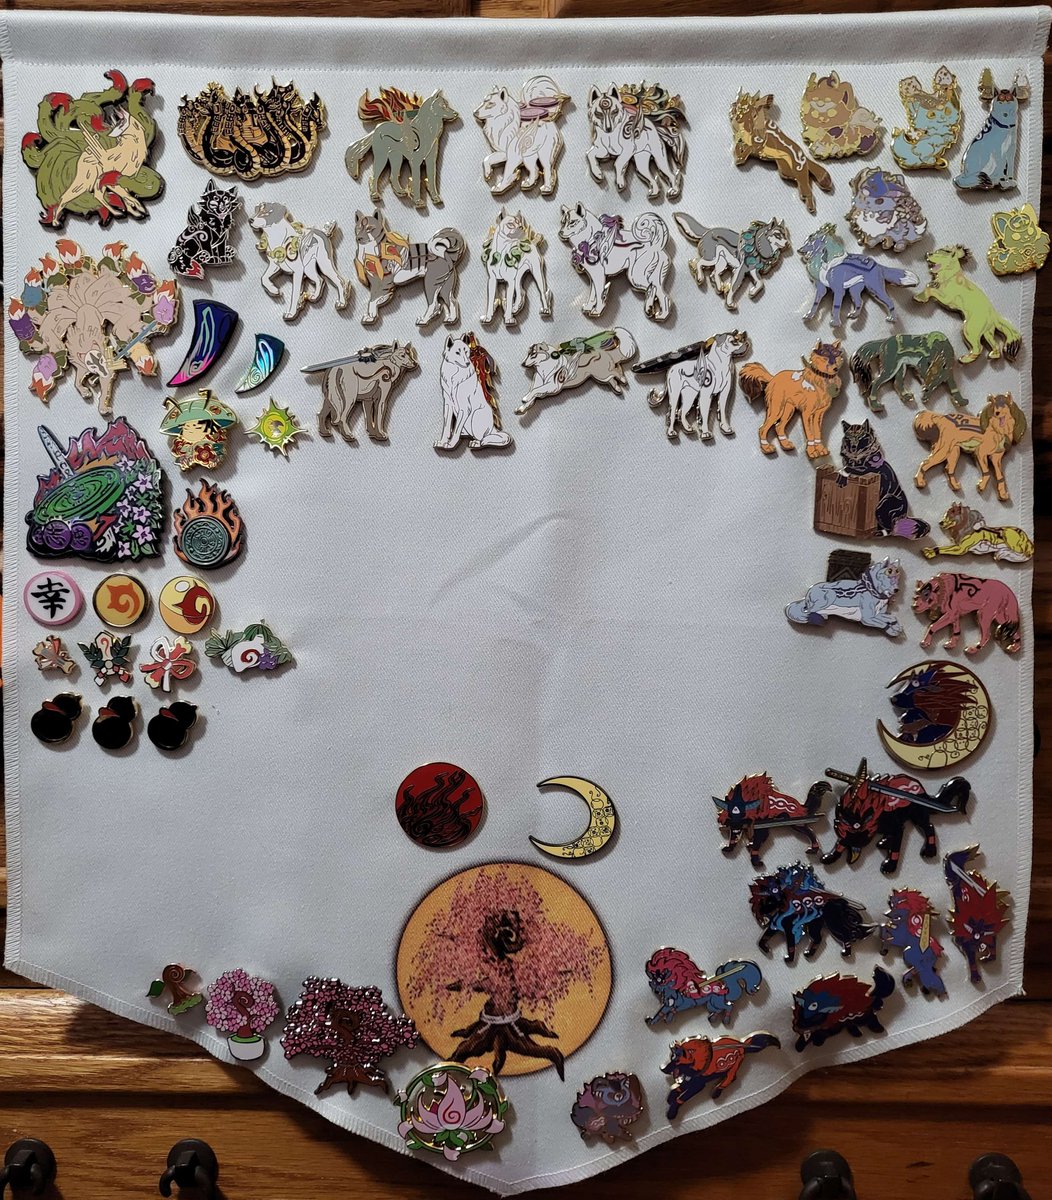 I'm a pin collector and it's great finding ones for my video games. I love Okami and finally got my last banner to show them to everyone.

I have other Okami stuff as well, such as lanyards, keychains, figures and statues!

#enamelpins #enamelpin #pincollector #okami